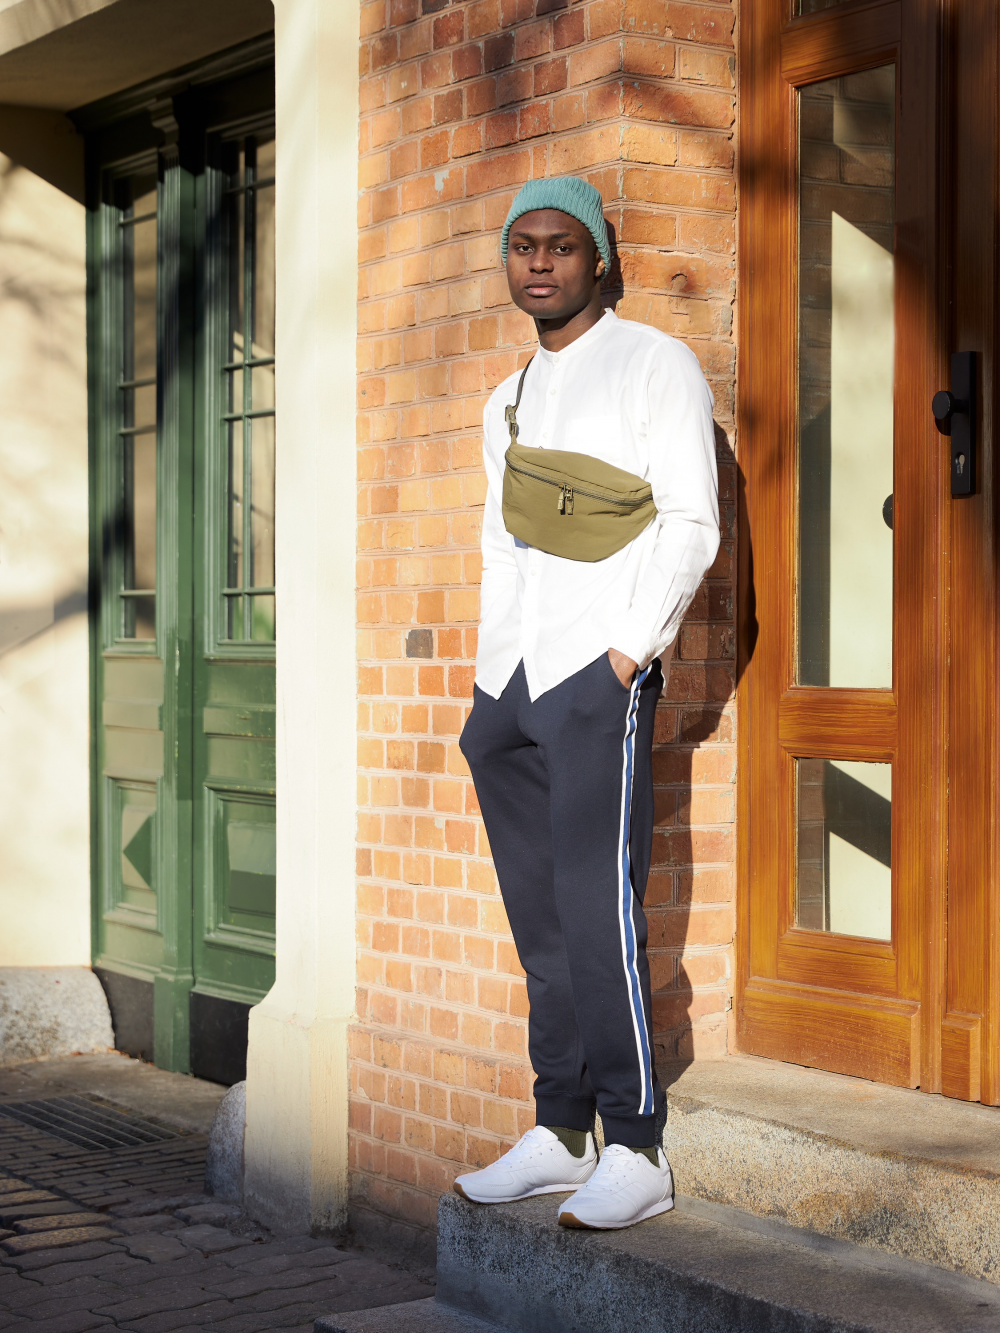 Check styling ideas for「Side-Stripe Sweatpants (2022 Edition)」